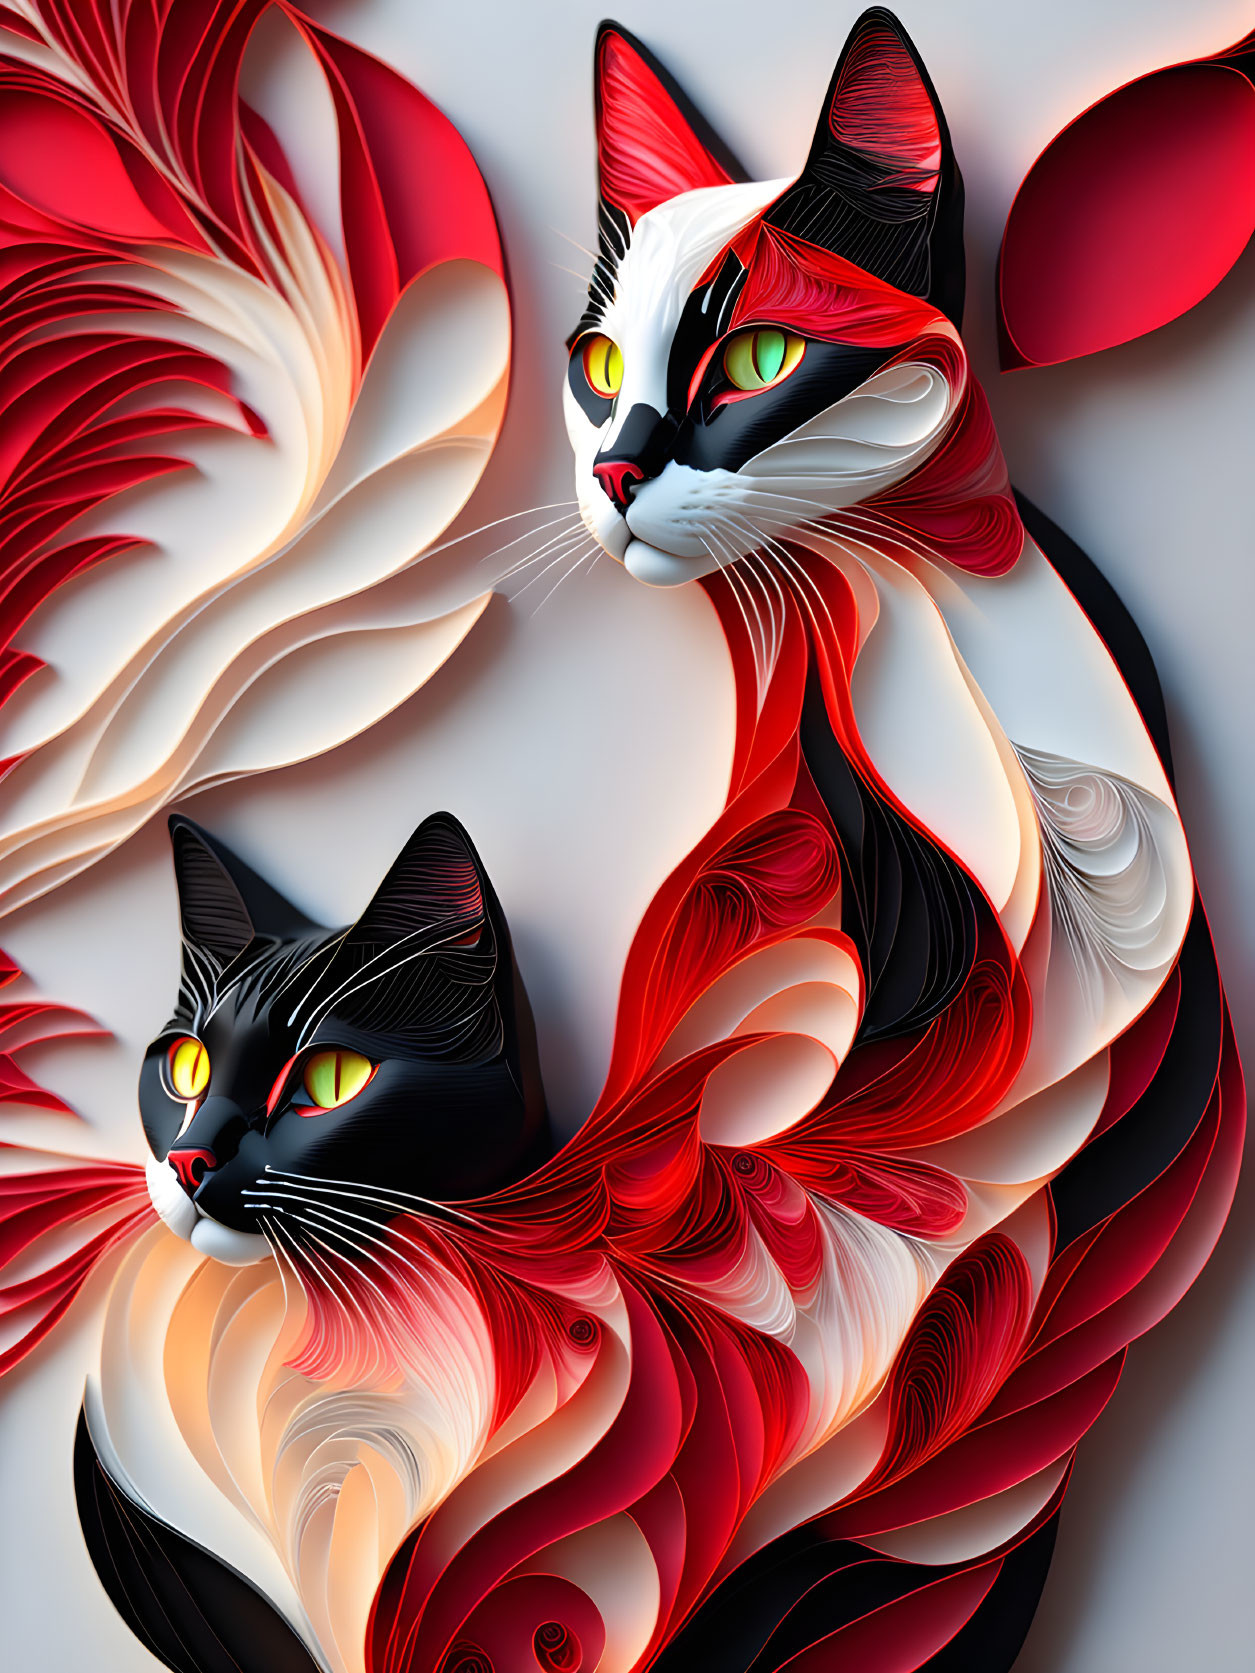 Stylized artistic cats with swirling red, black, and white patterns